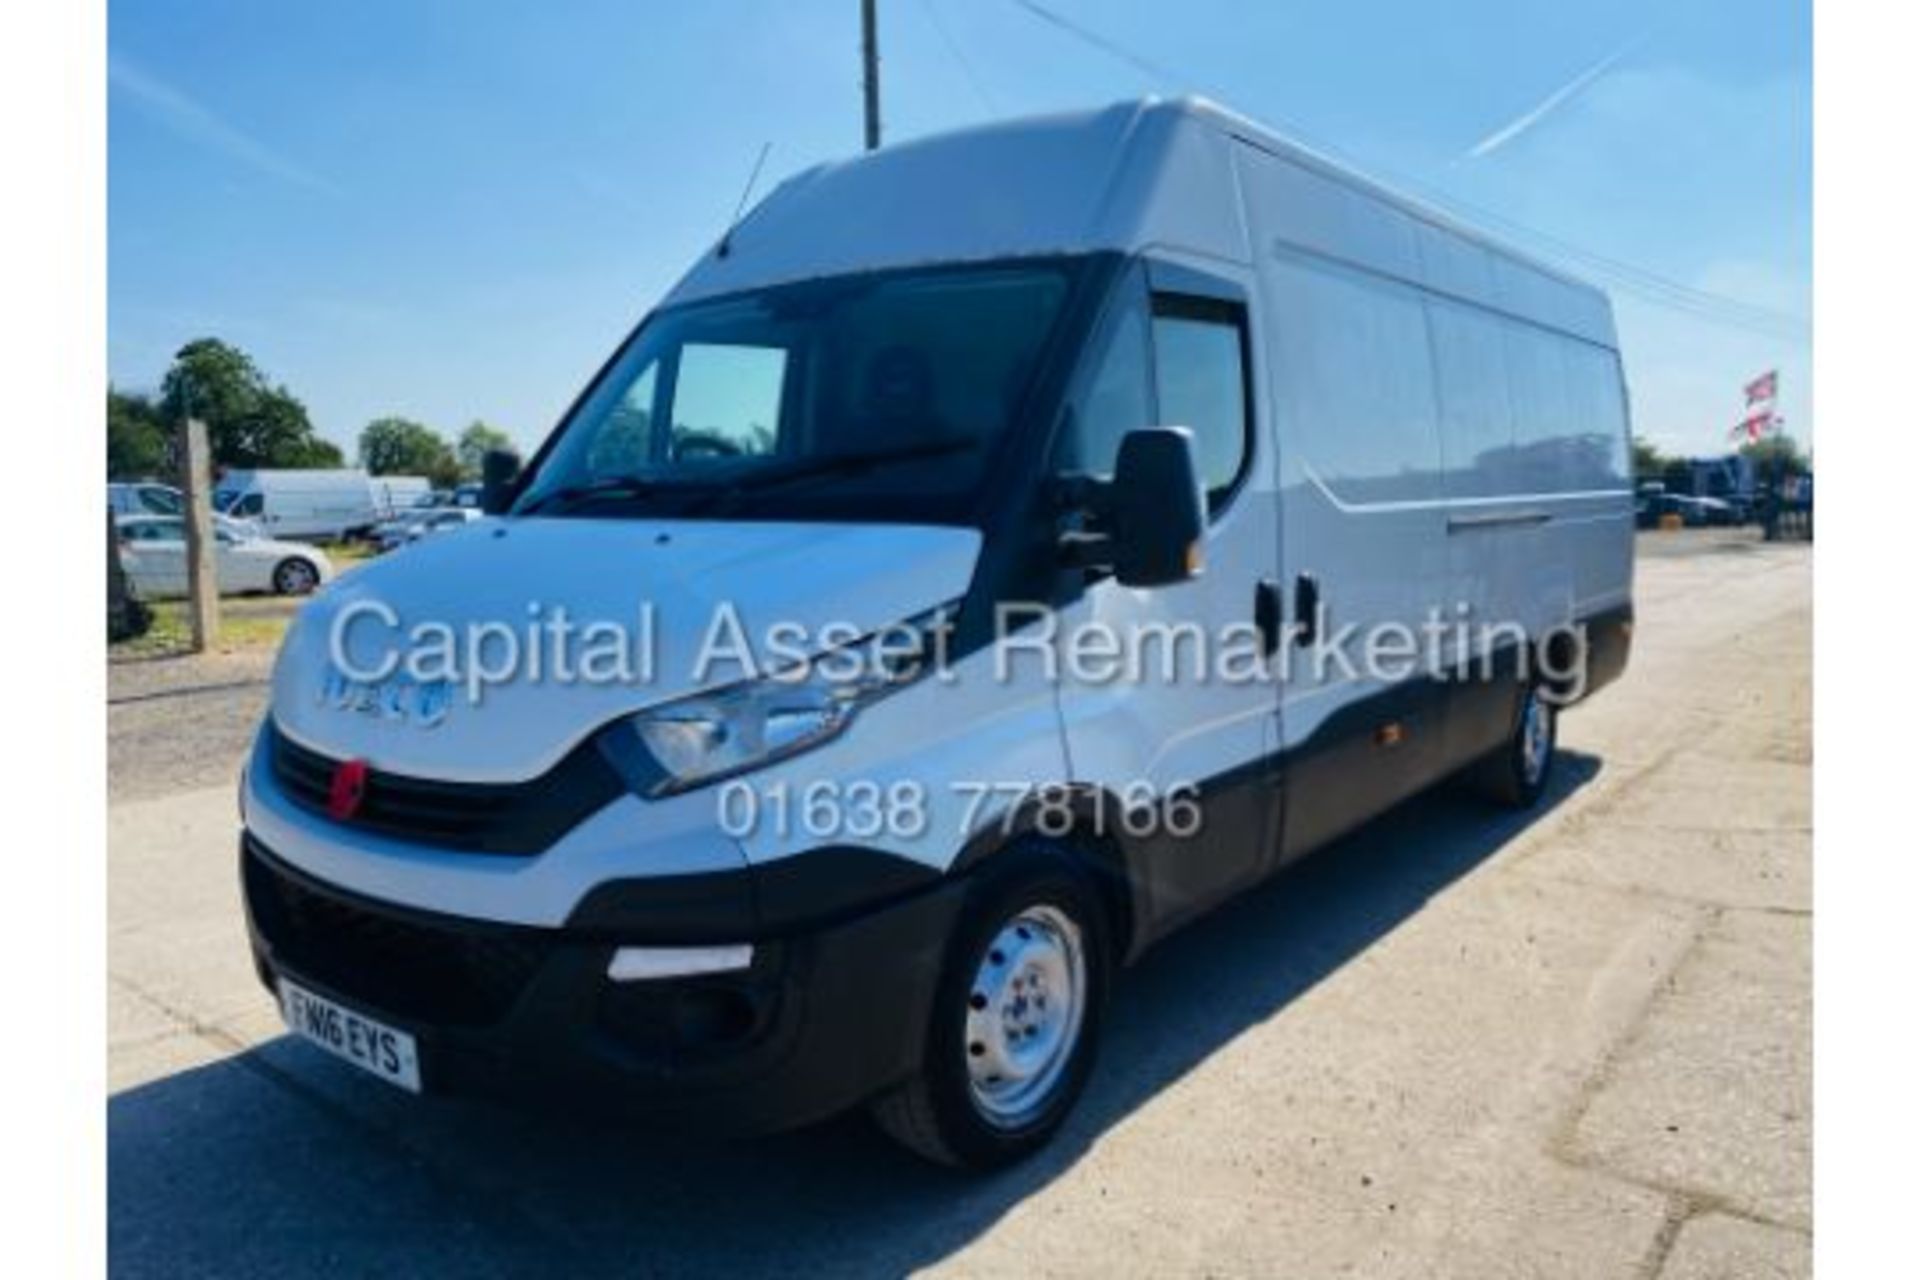 ON SALE IVECO DAILY 35S13 "LWB" (NEW SHAPE) 16 REG - 1 OWNER - AIR CON - SAT NAV - IDEAL CAMPER!!